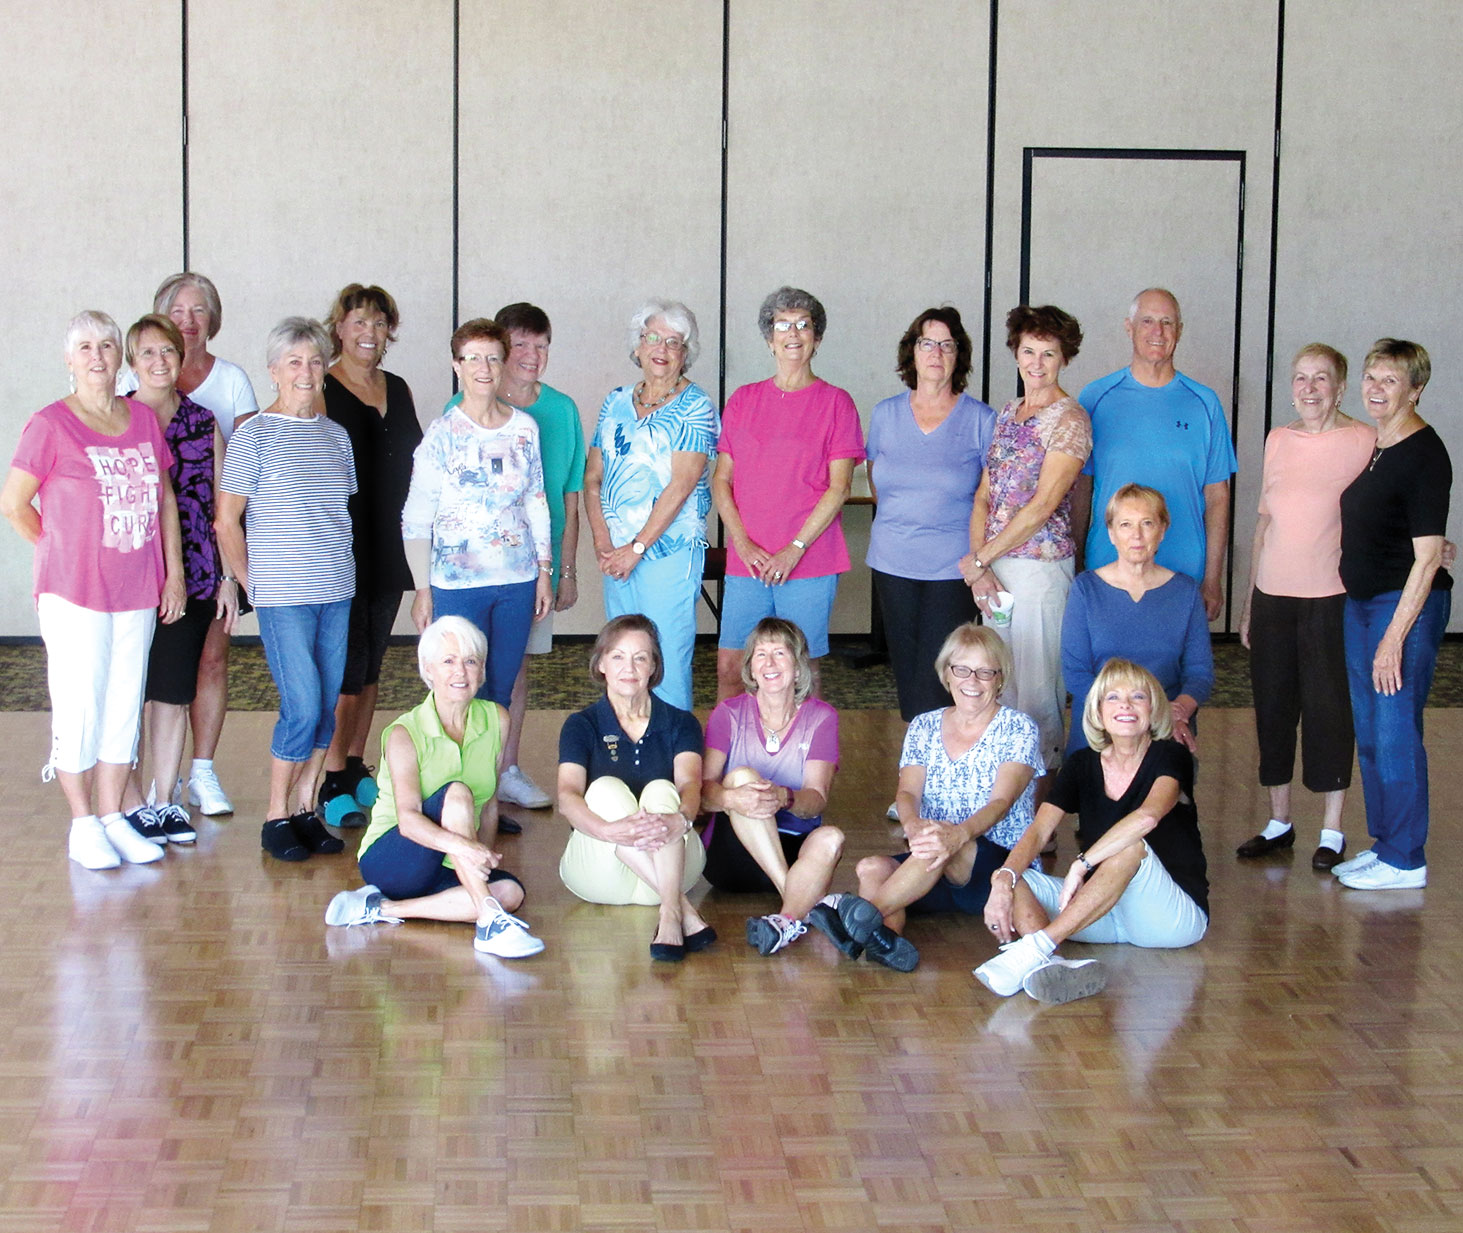 Tuesday morning level two class of line dance with Rebecca contains a mystery Ranch dancer. Can you find her? Classes at the Ranch welcomed the fall weather with new dances and loads of fun brain work.